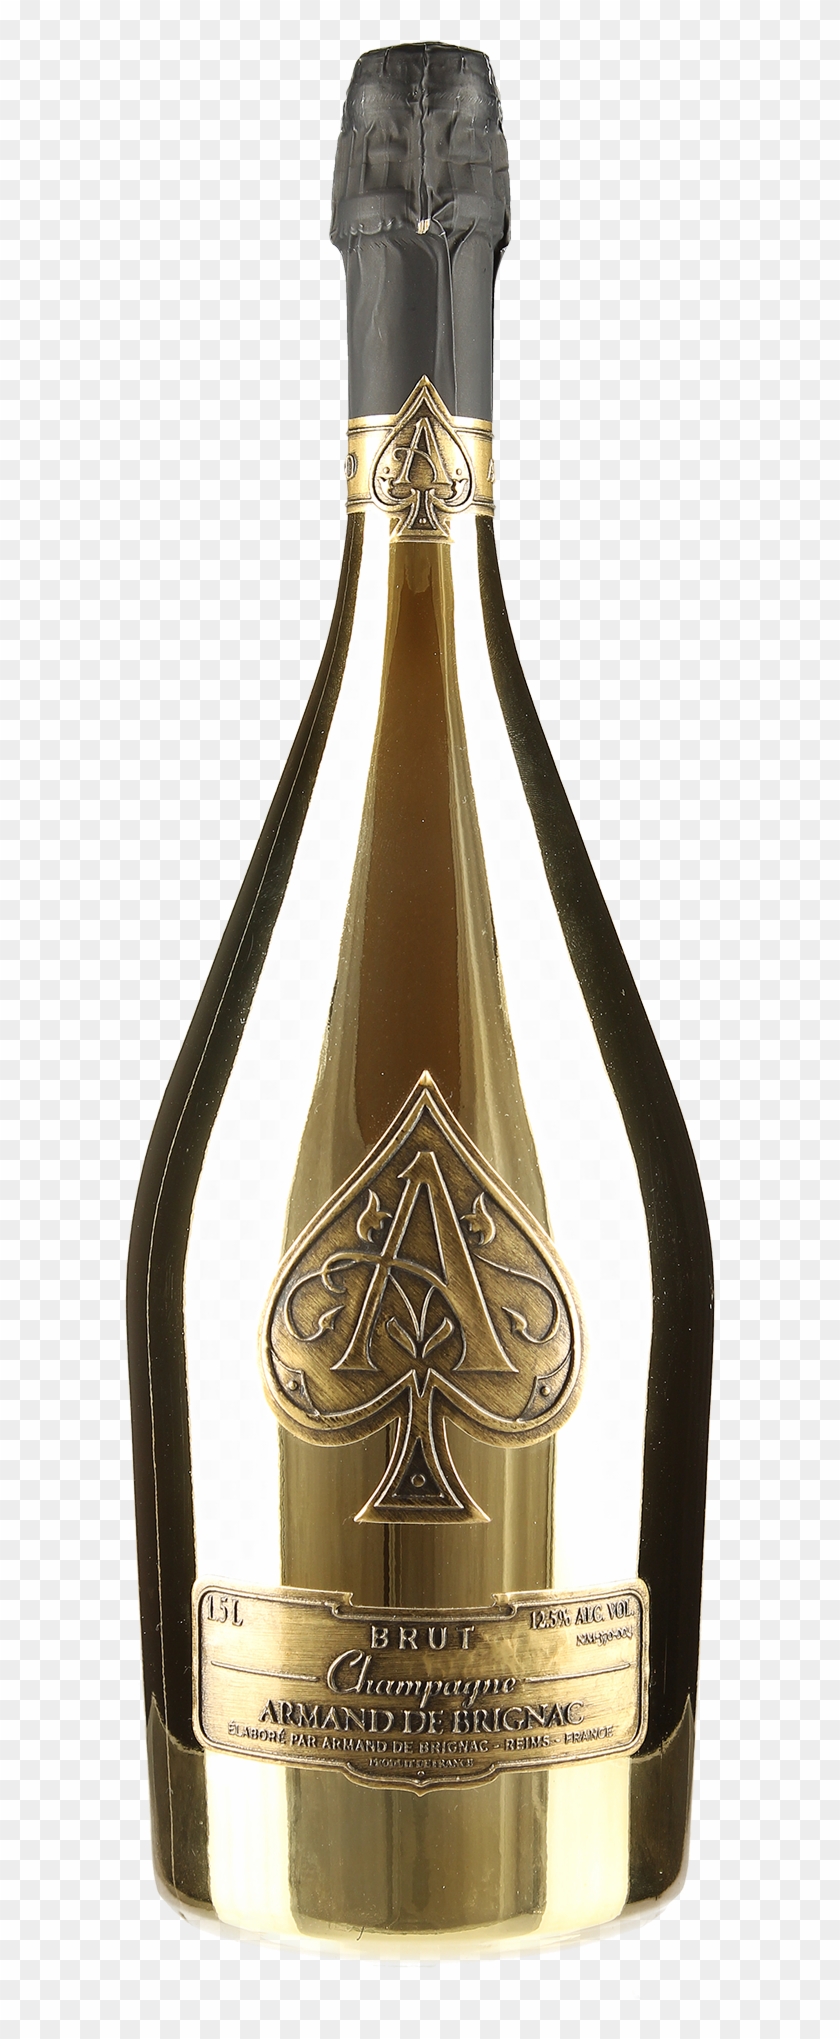 Ace Of Spades Champagne Png Transparent Background - Ace Of Spade Champagne Png Clipart